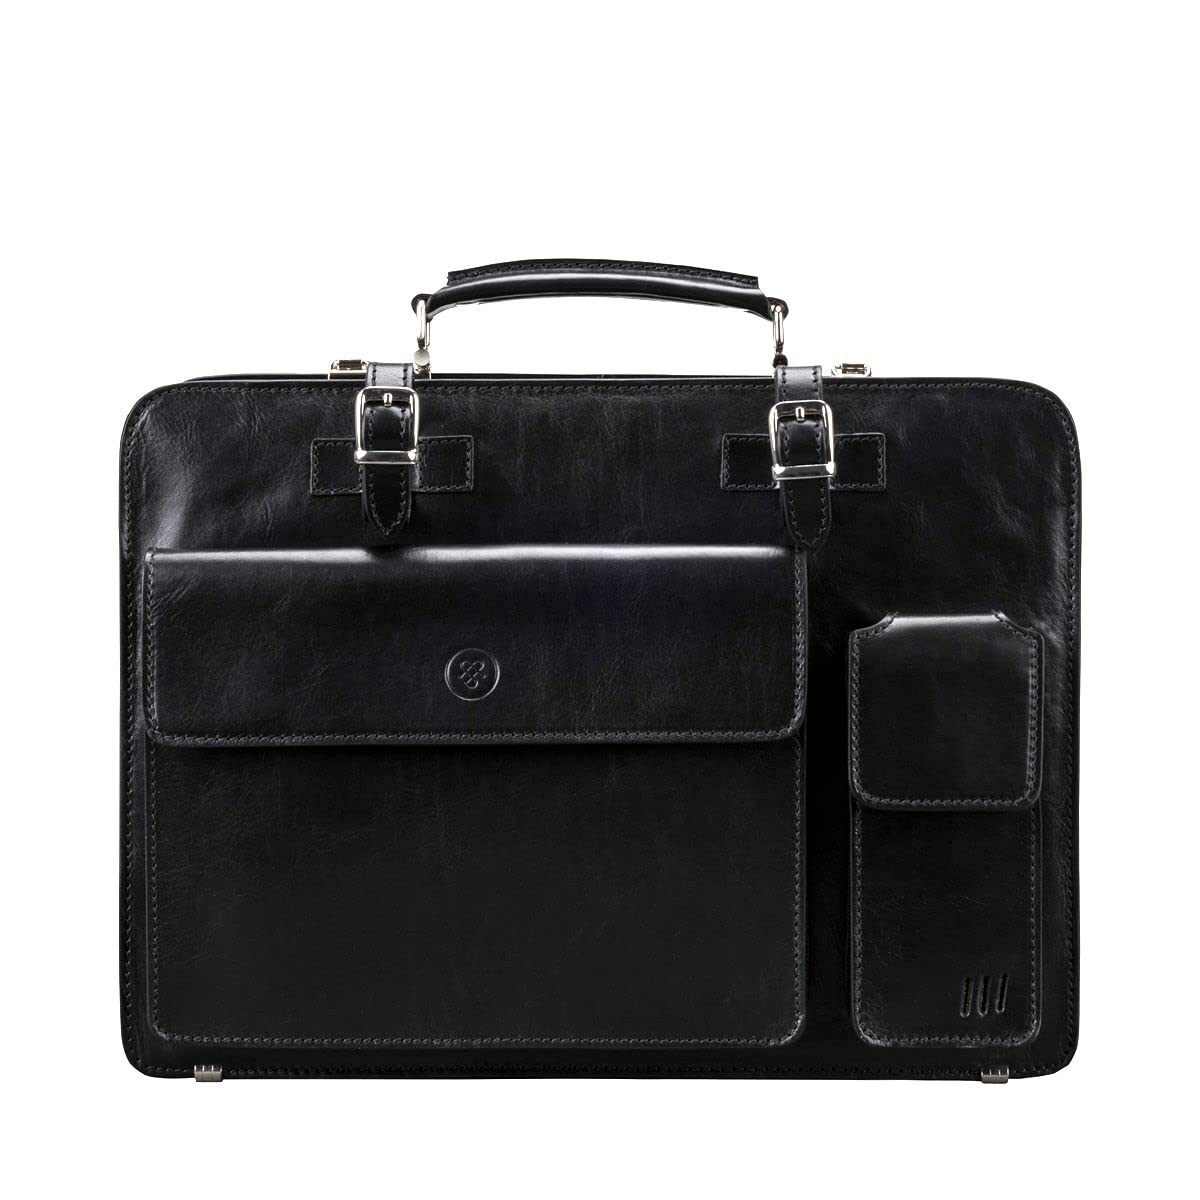 Maxwell Scott | Mens Luxury Leather 2 Section Large Briefcase | The Alanzo | Classic Business Travel Laptop Bag